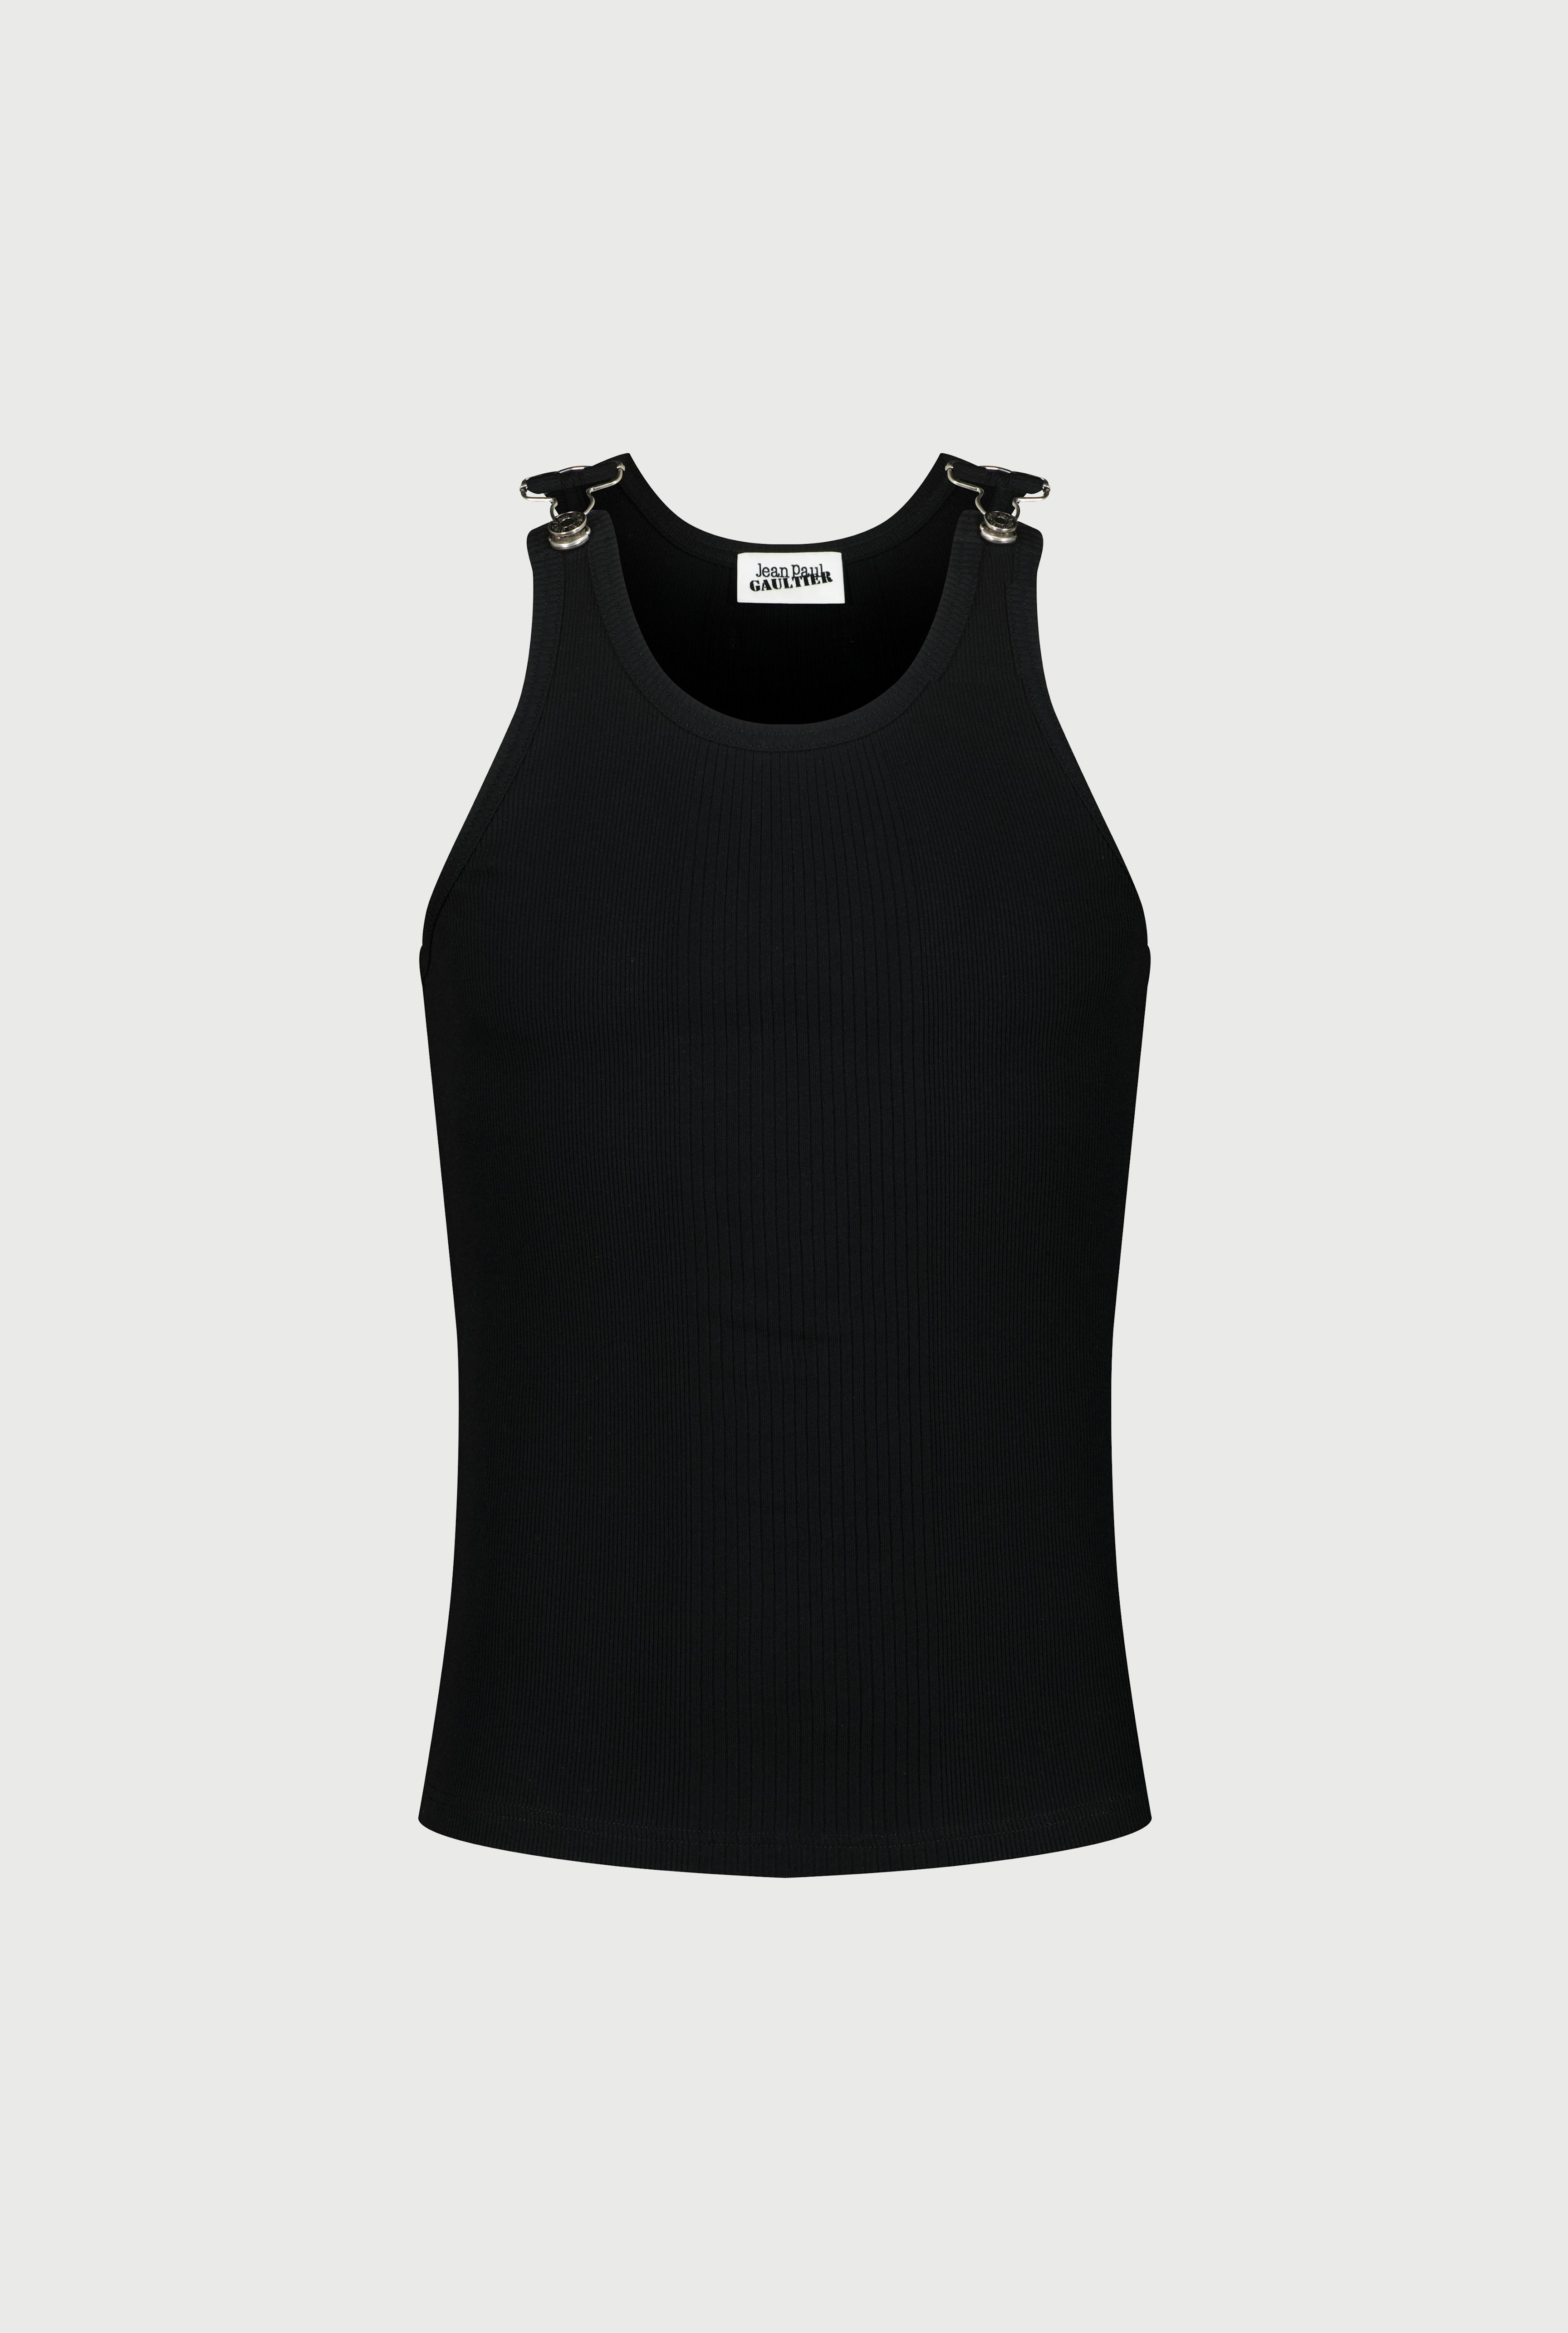 The Tank Top with Black Straps